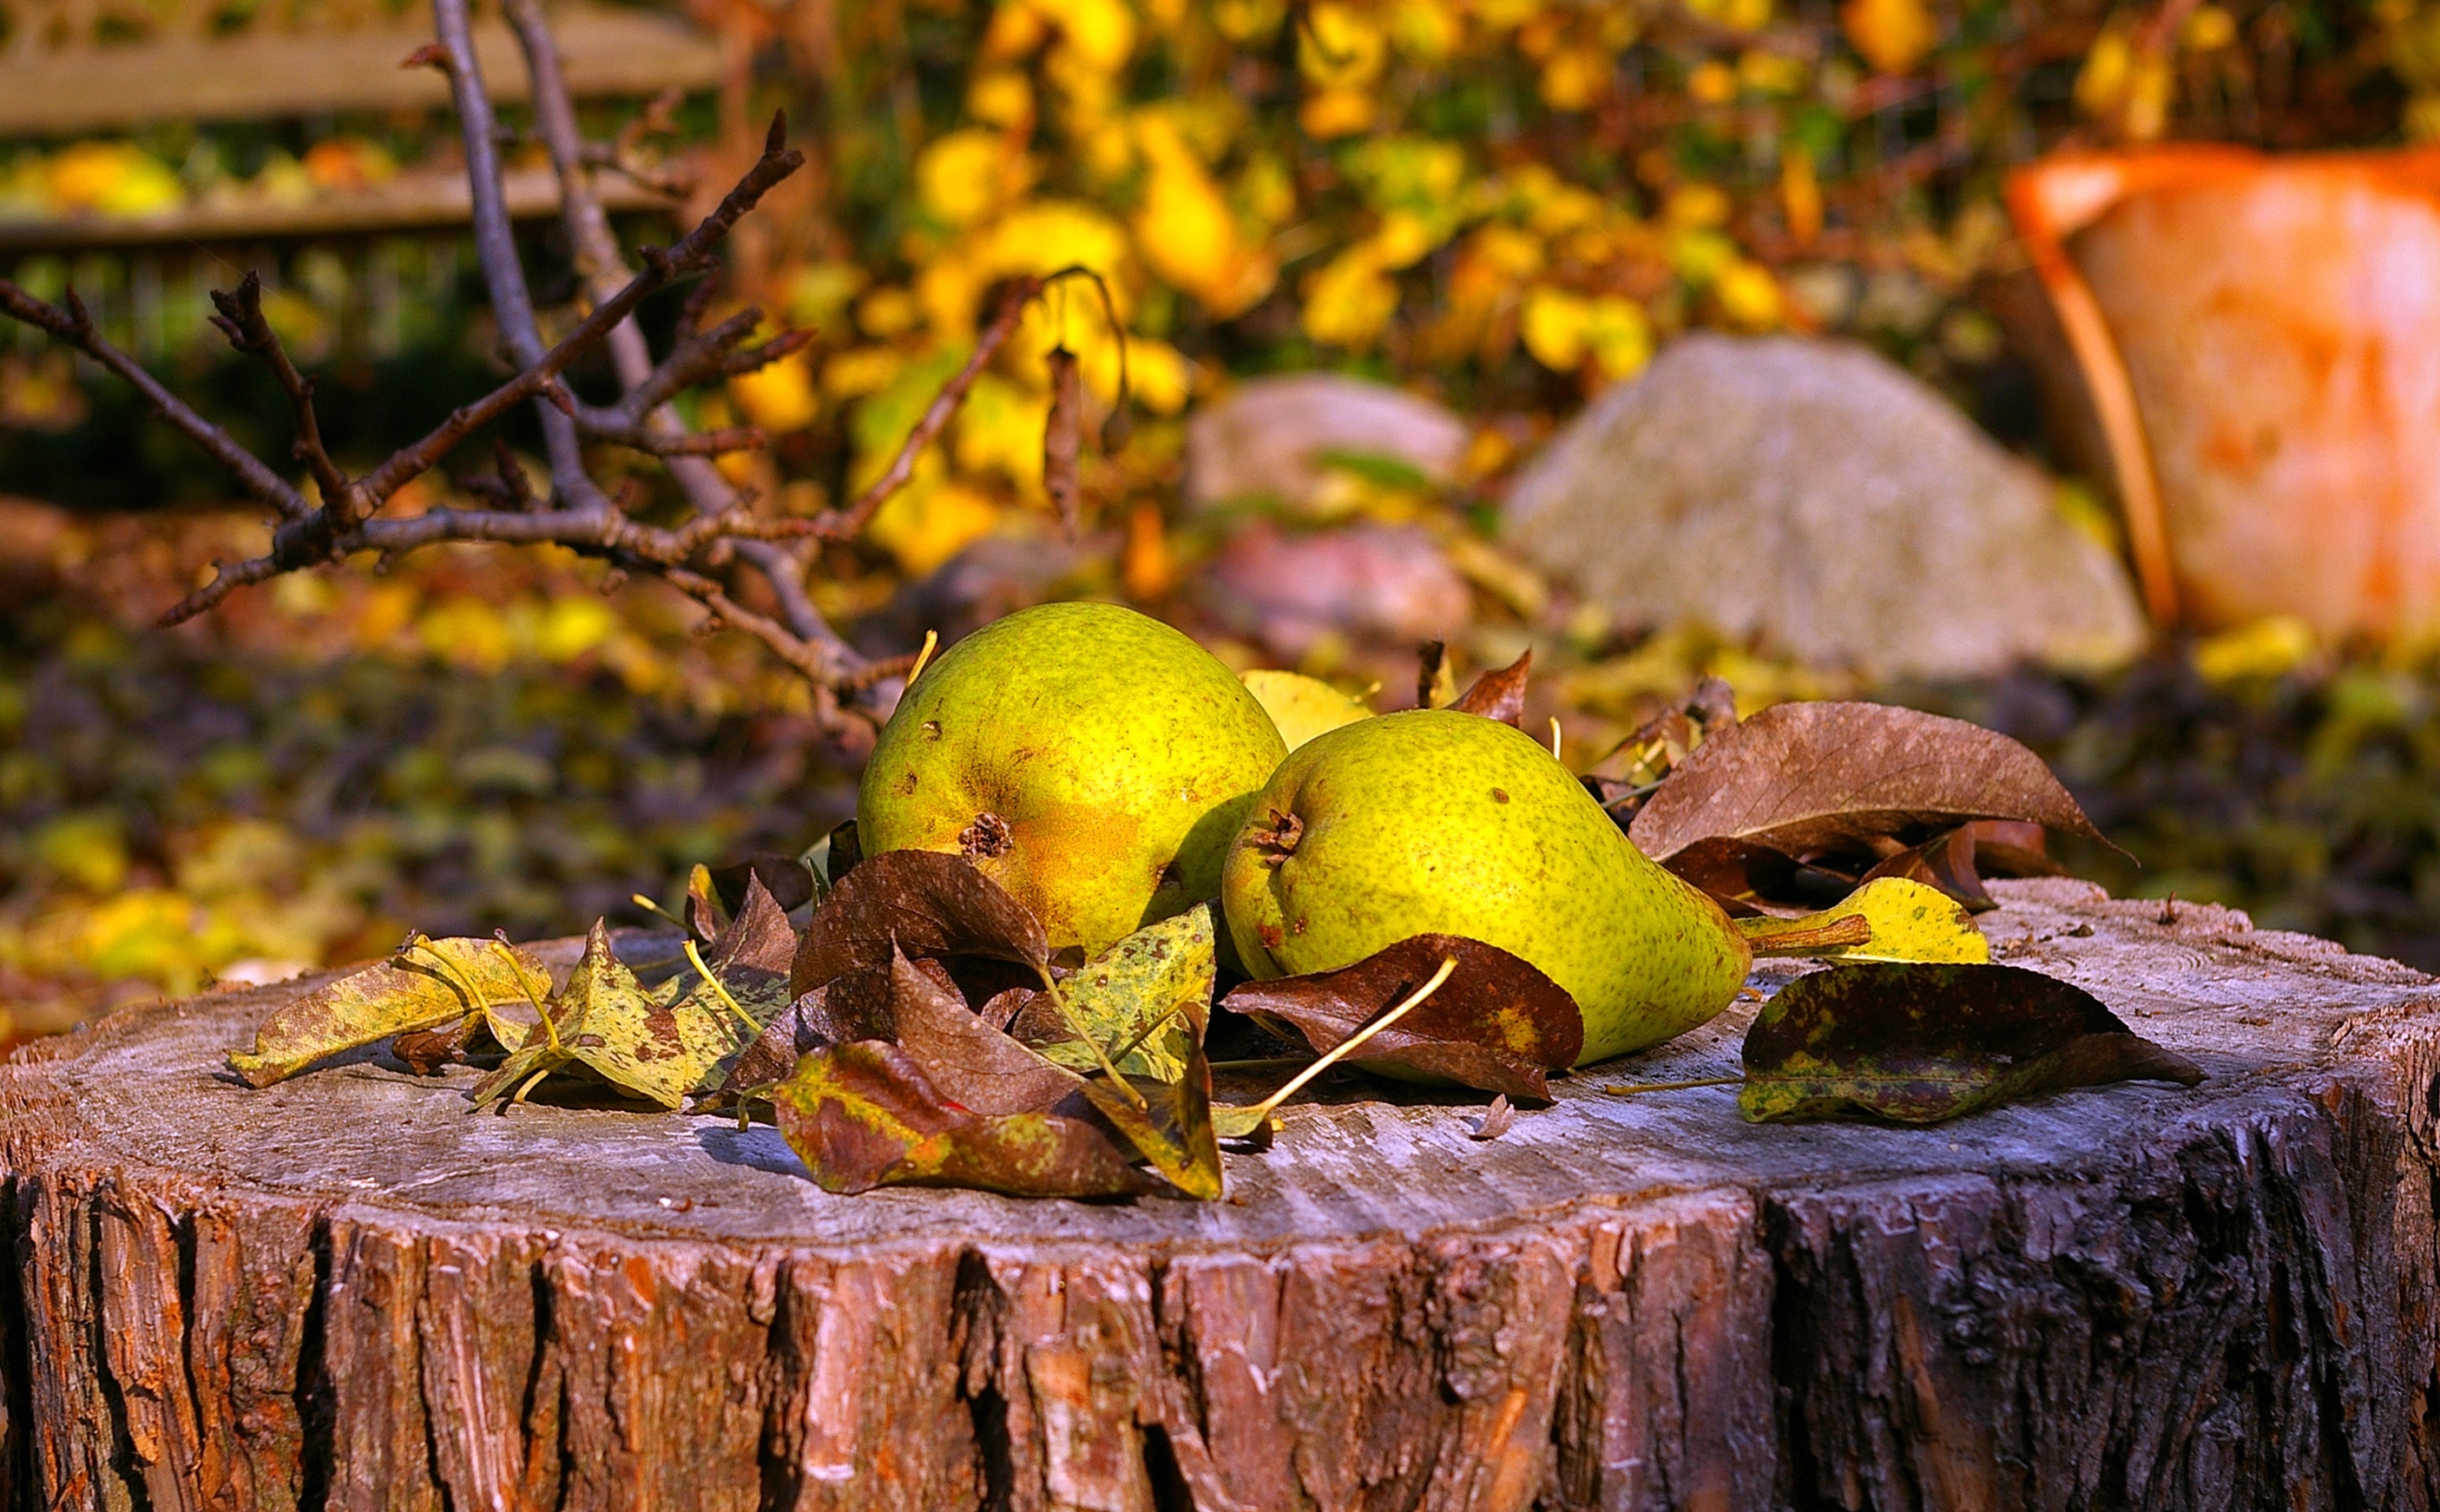 Autumn, Fruits, Harvest, Fruit, Pears, no people, yellow